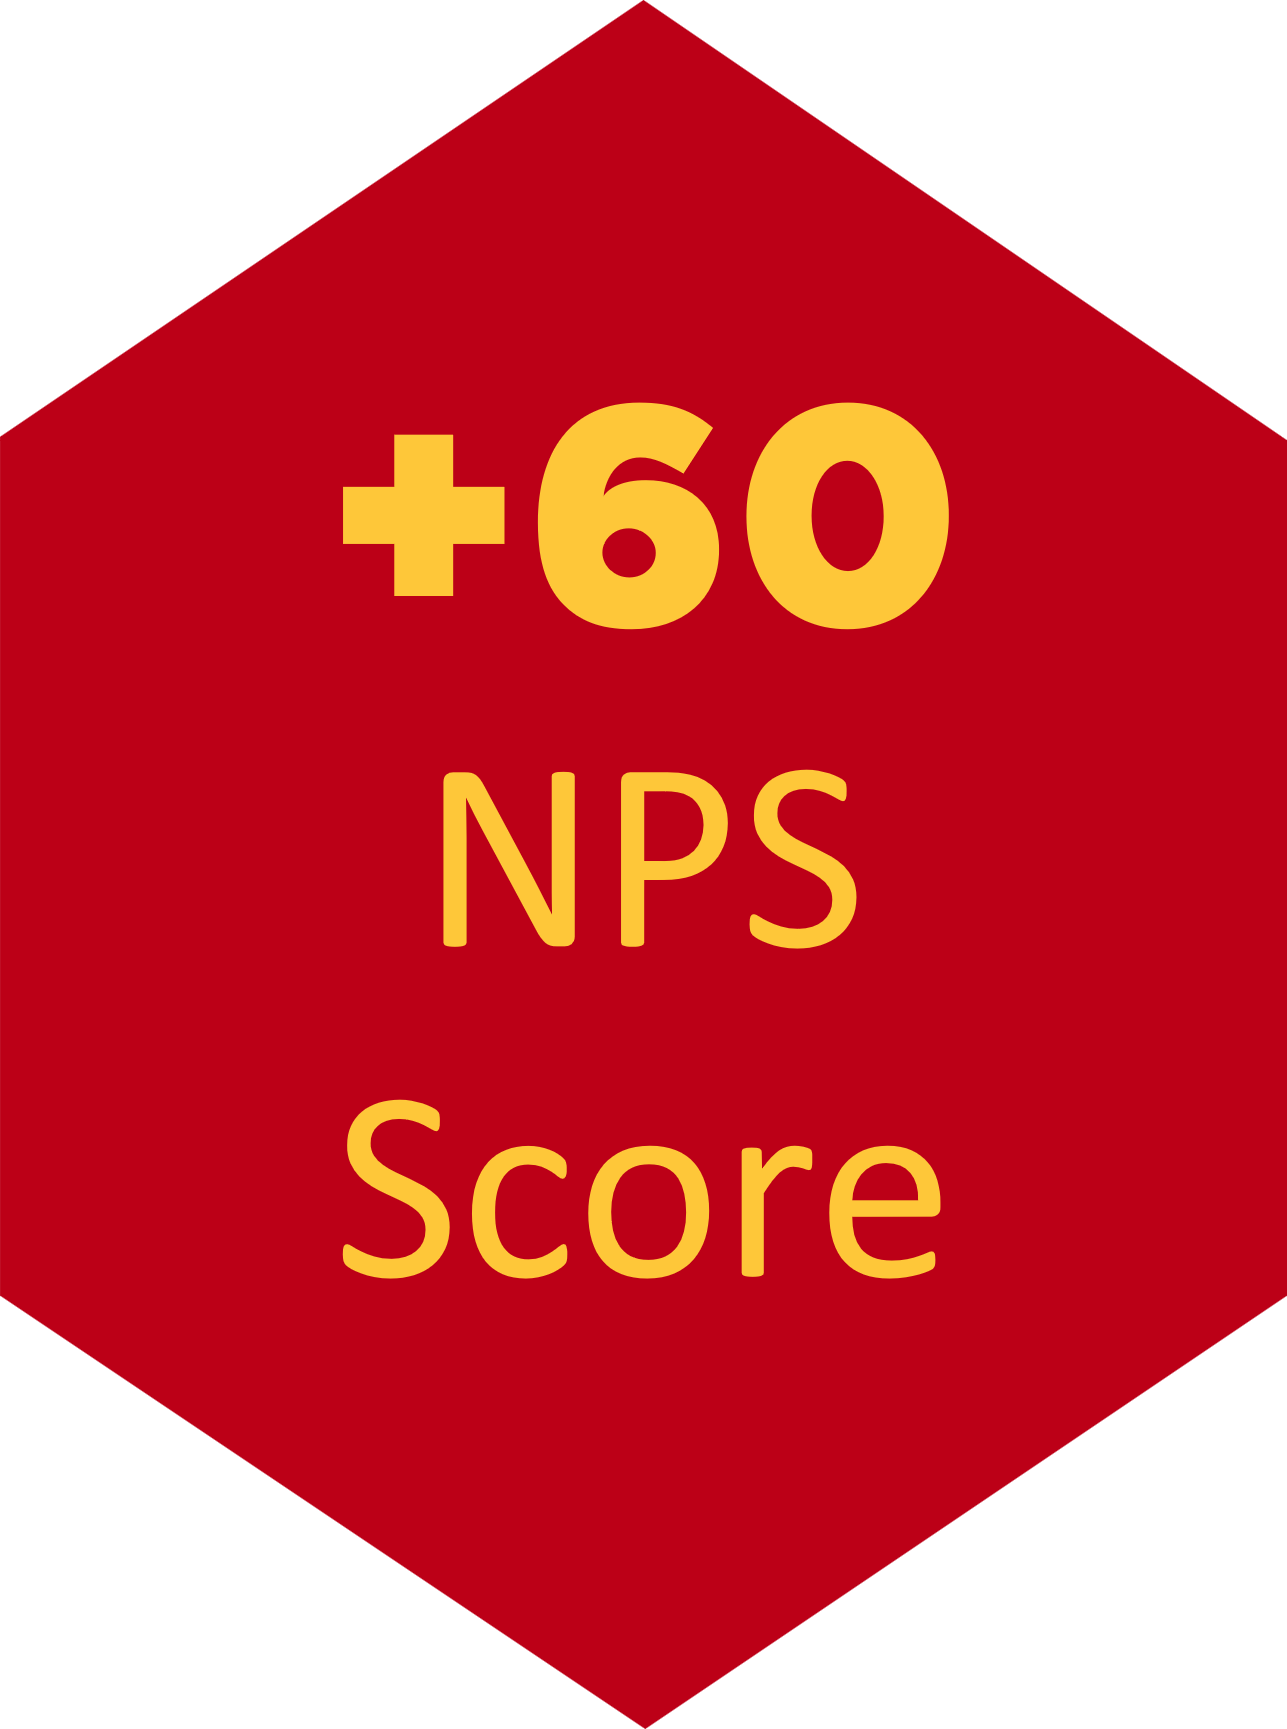 A bright red hexagon with yellow text inside it saying '+60 NPS Score'